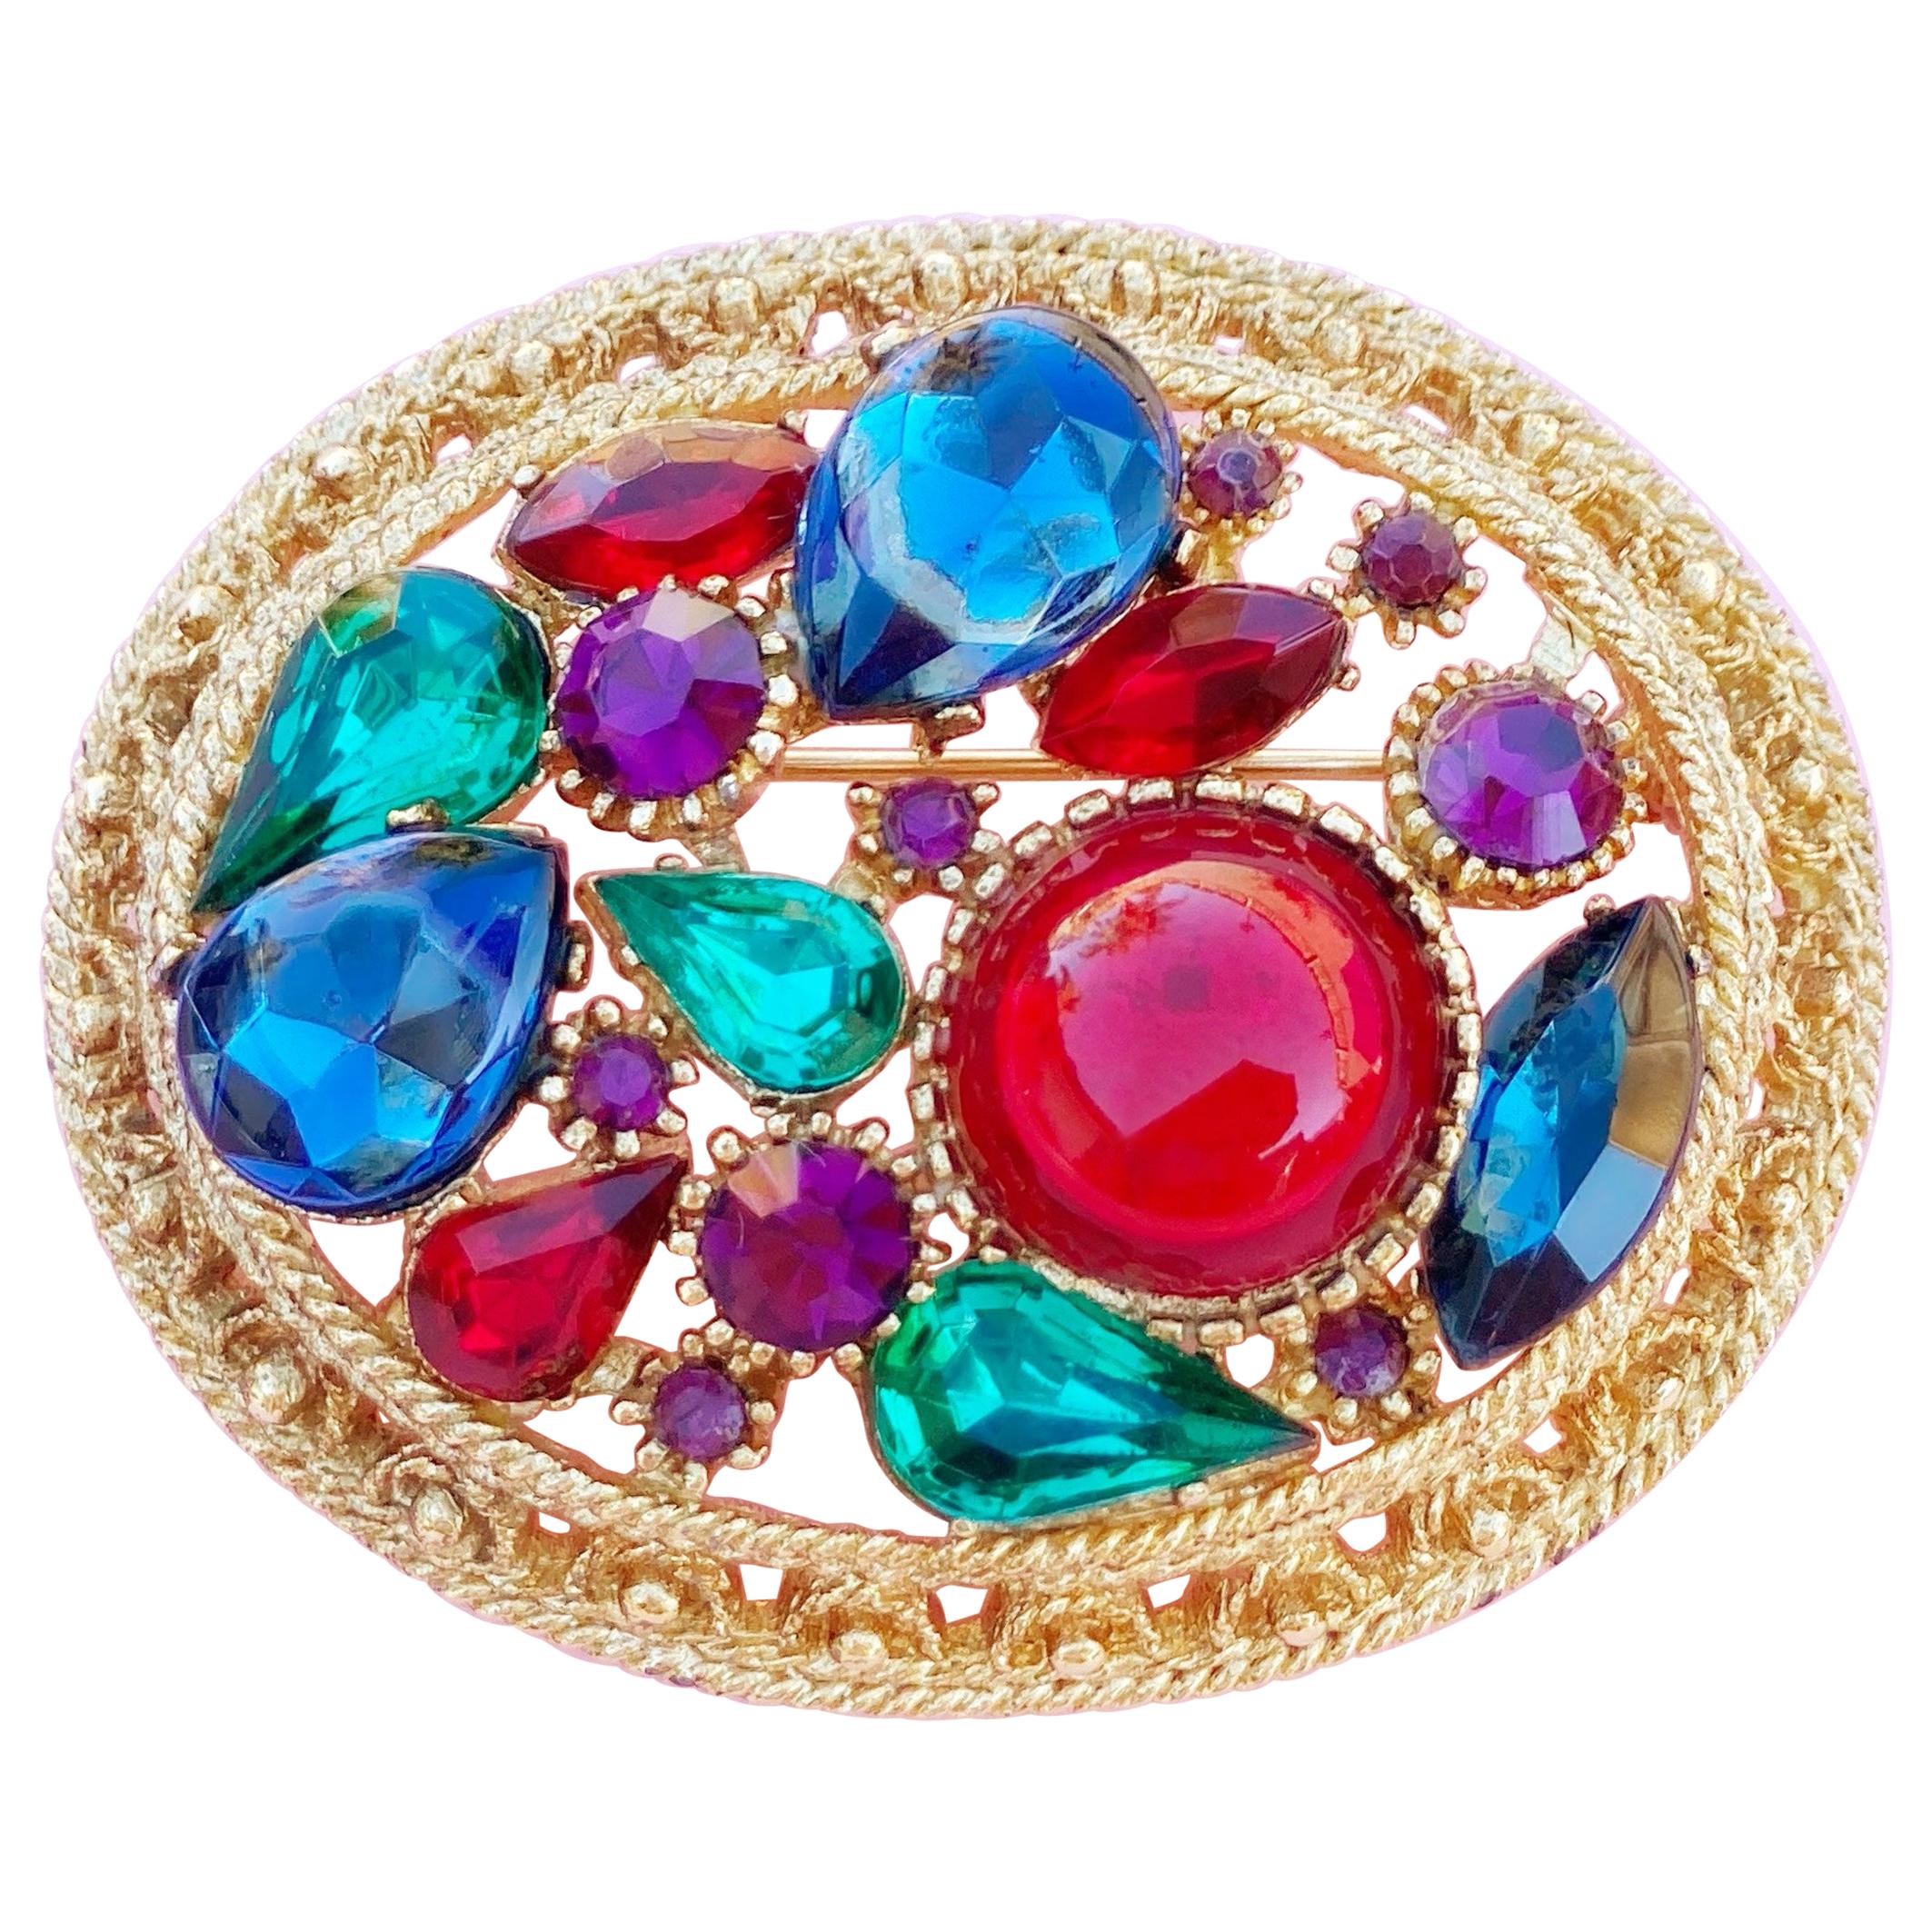 Vintage Oval Mughal Style Cabochon Brooch by Sphinx, 1960s